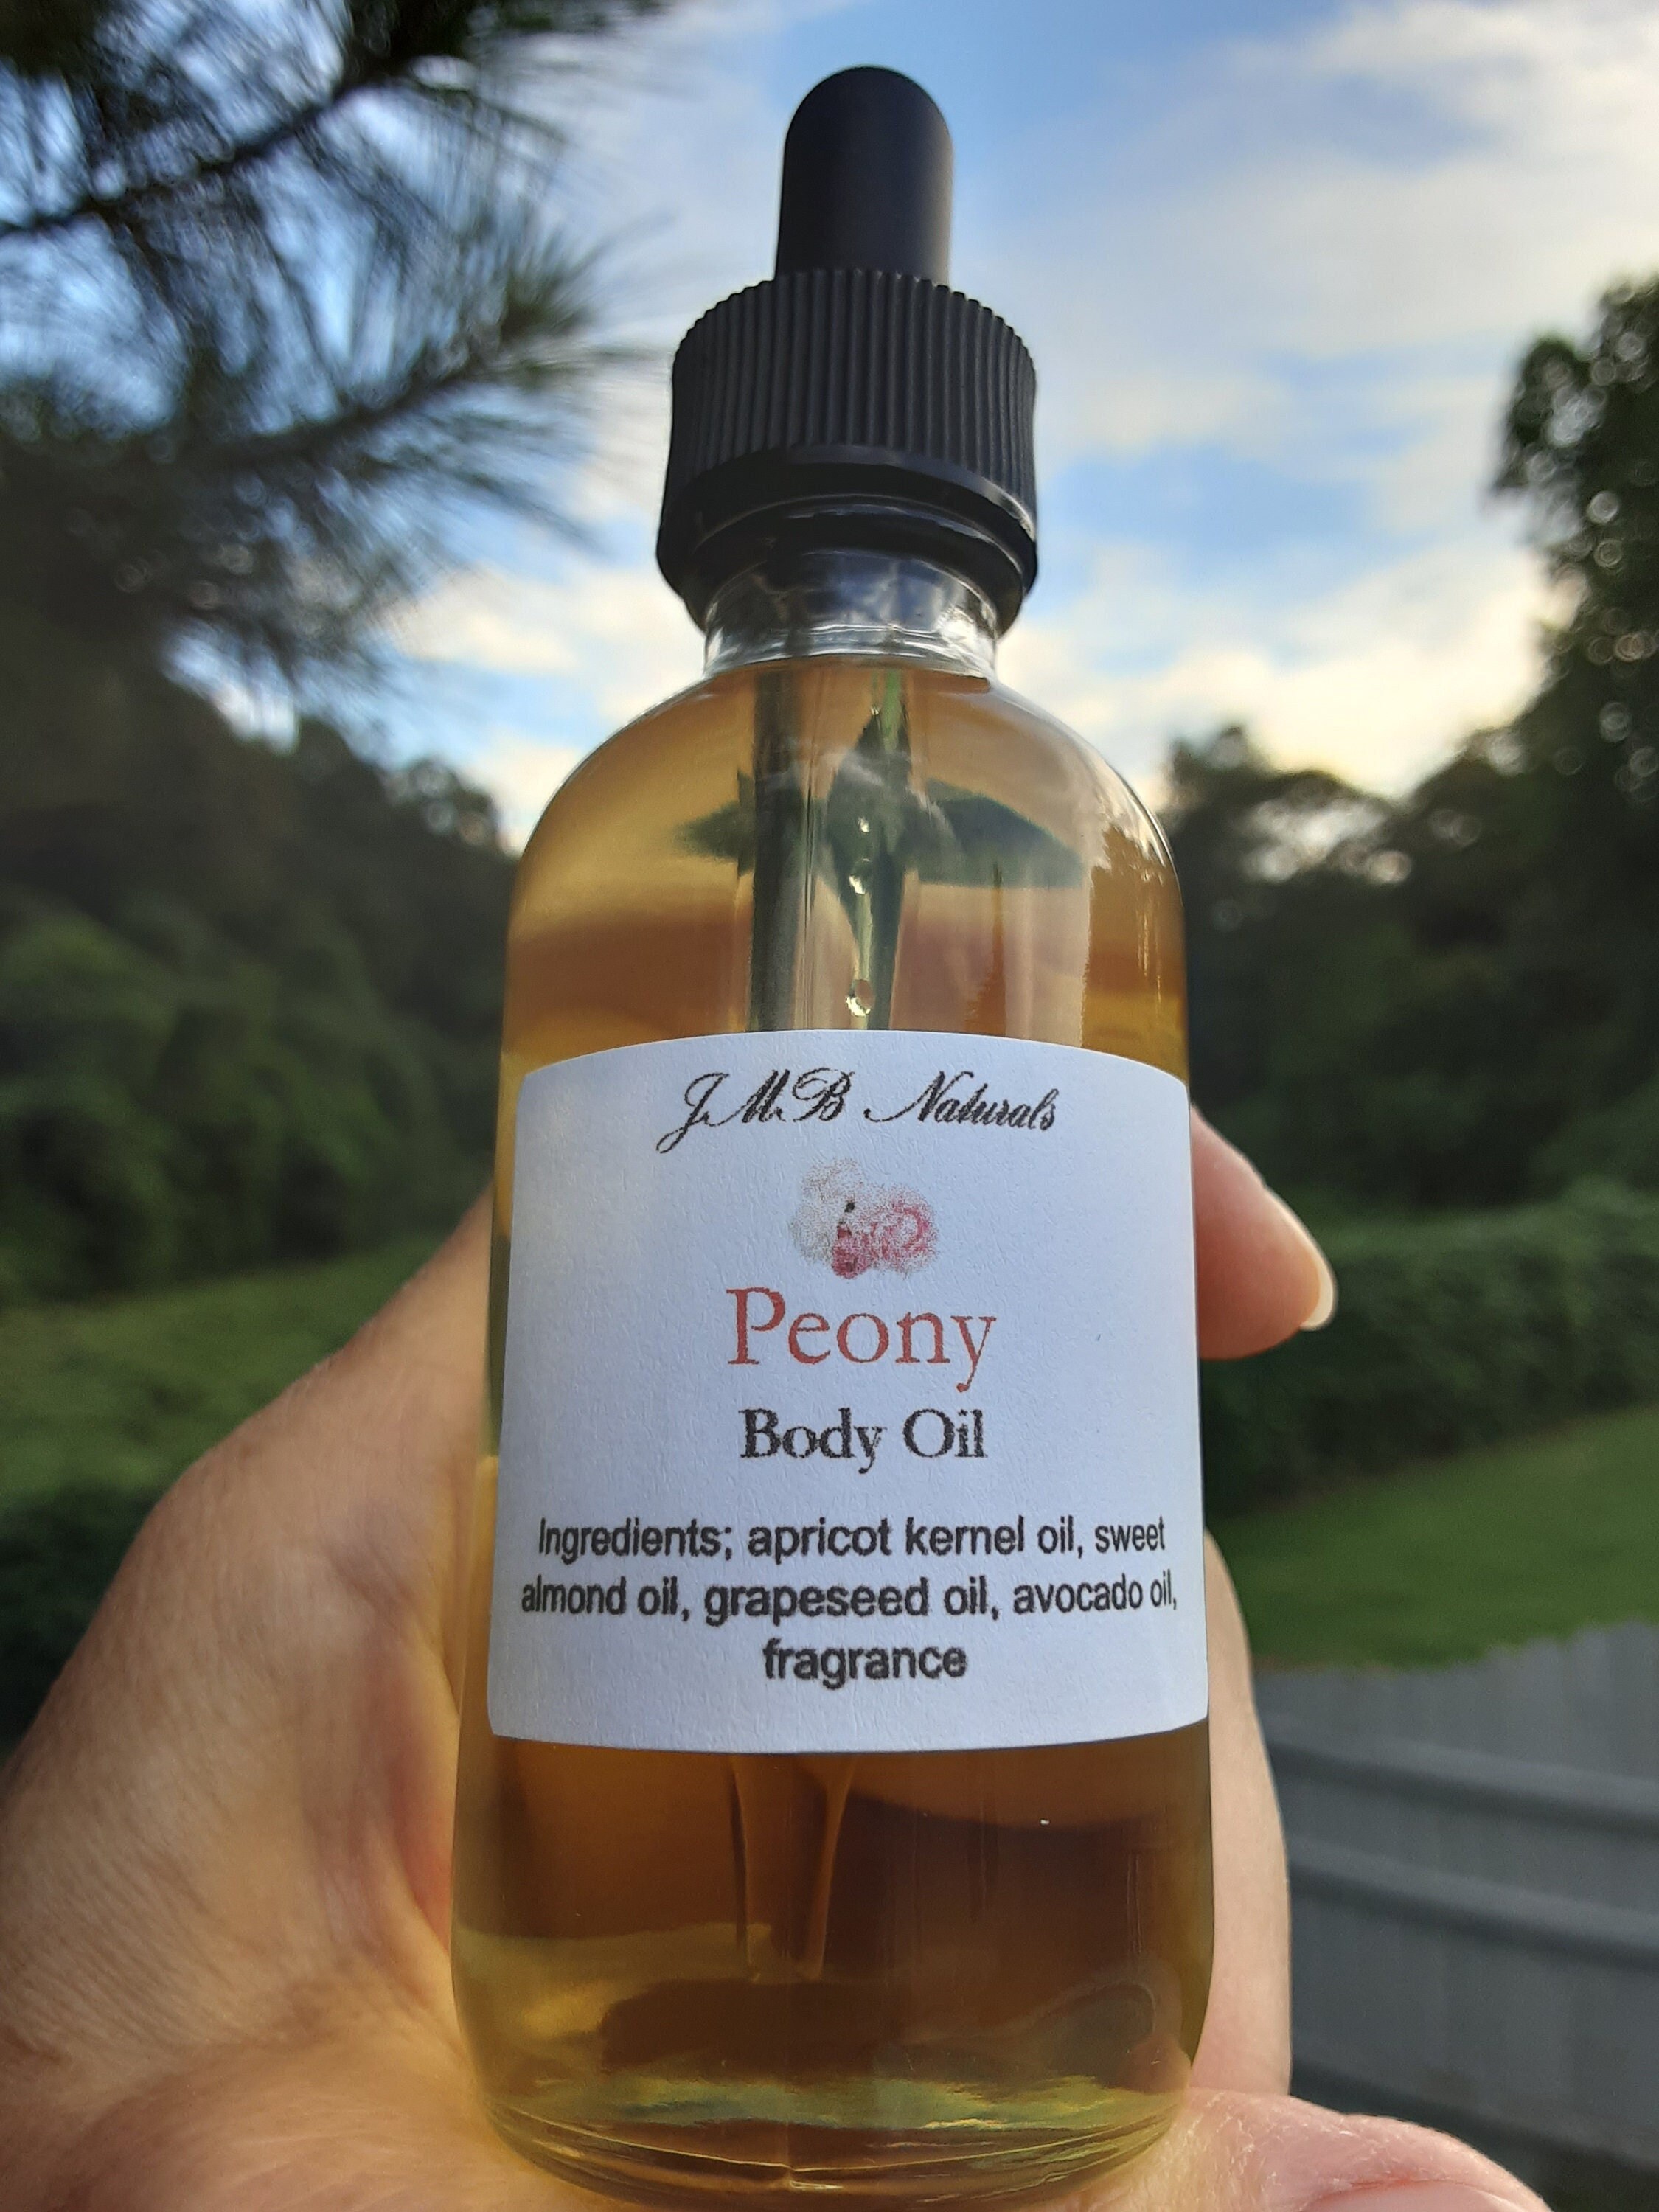 Peony: Essential Oil, unverified  Anarres Natural Health Apothecary